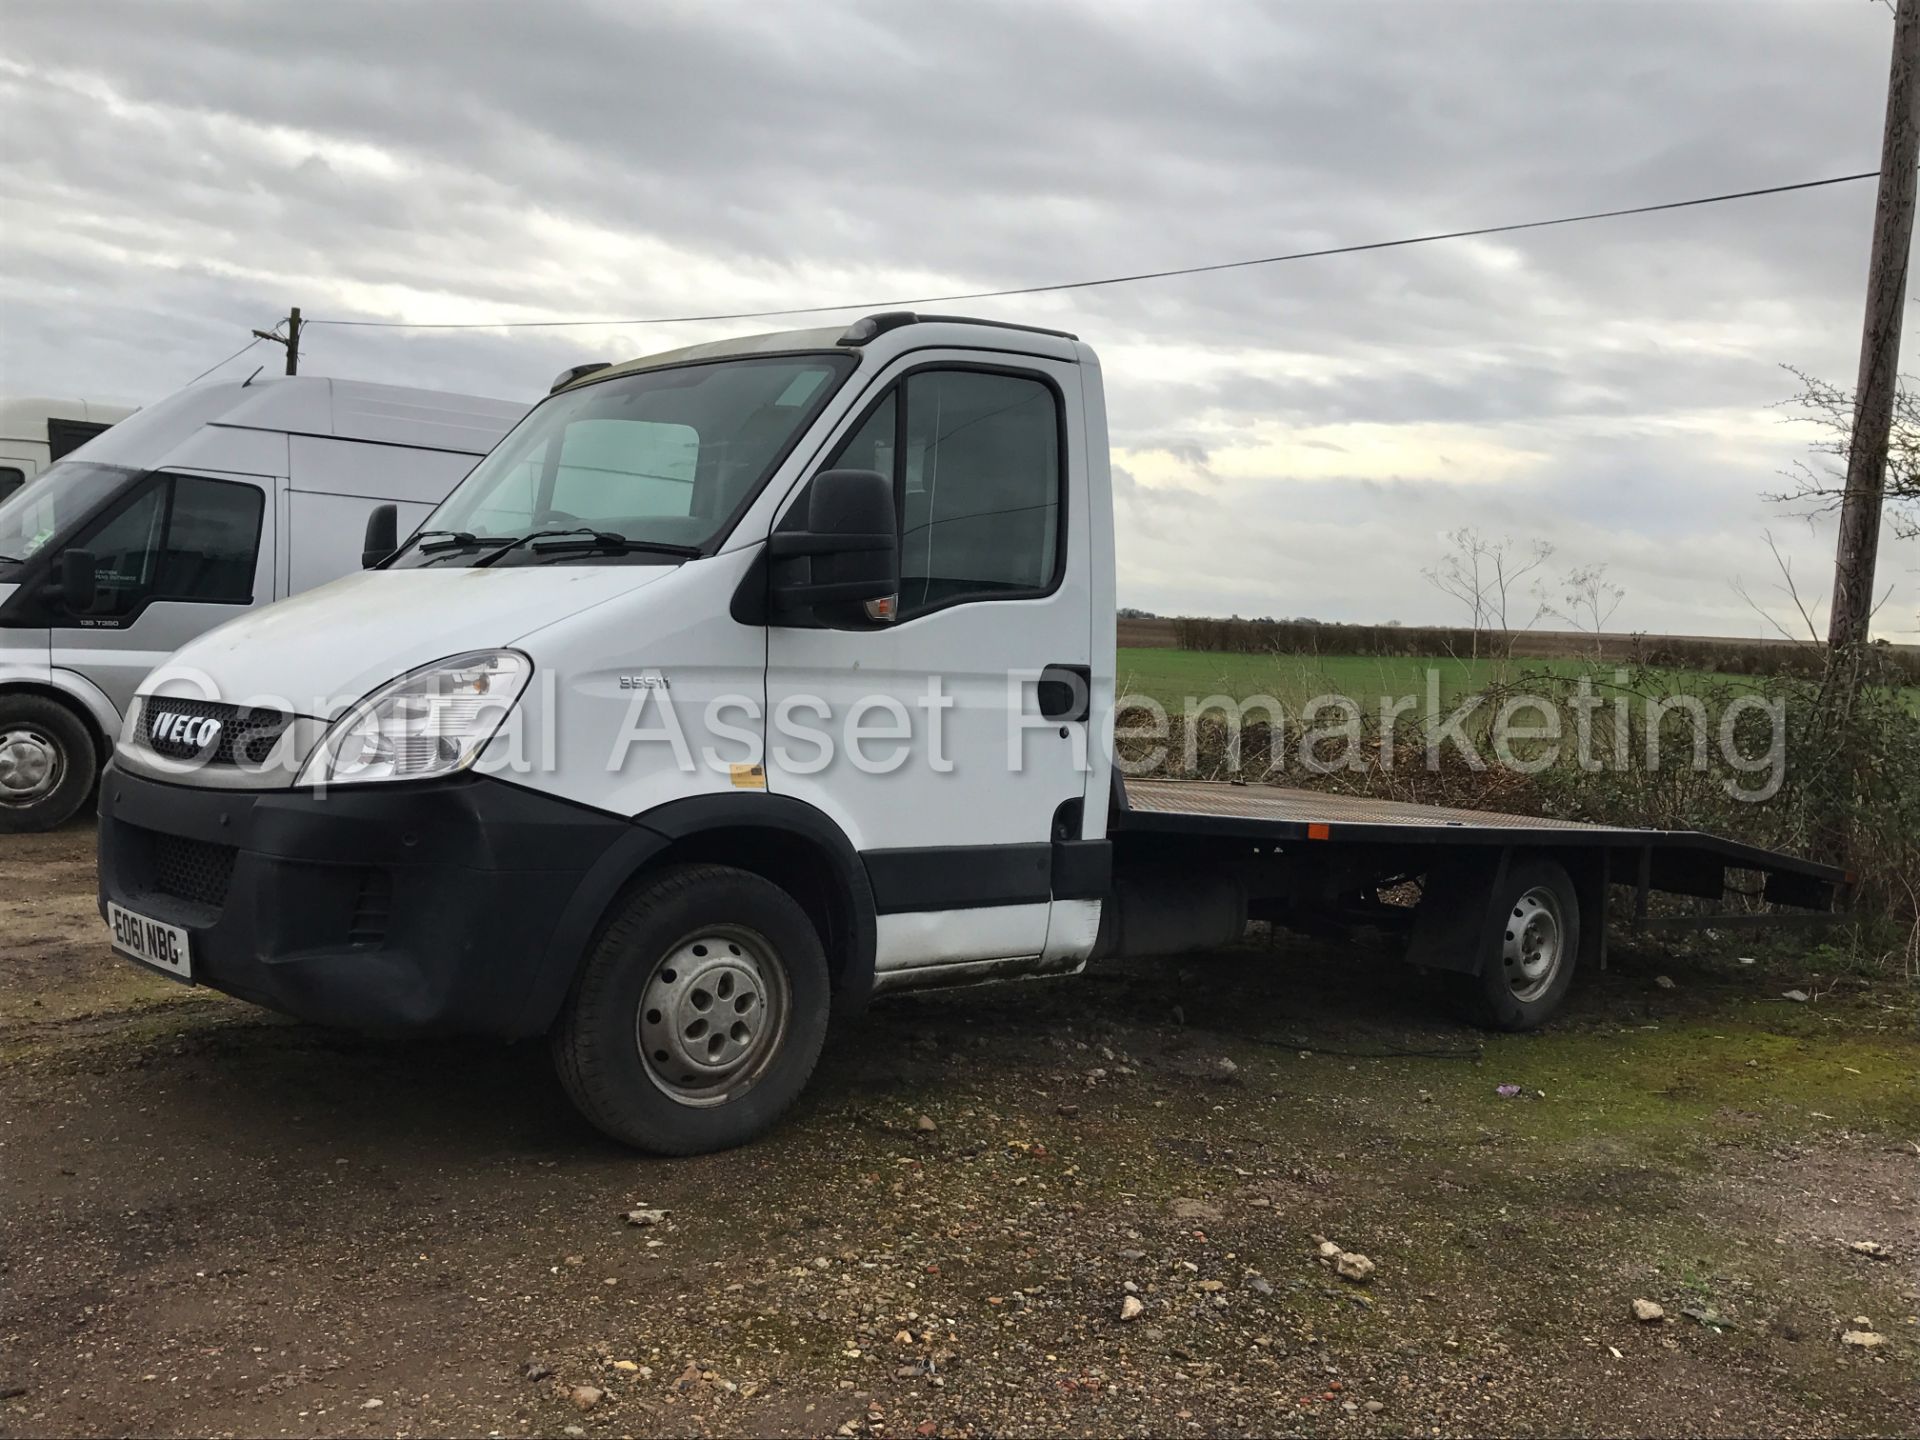 (On Sale) IVECO DAILY 35S11 '16 FT RECOVERY TRUCK' (2012 MODEL) *BRAND NEW BODY* (1 OWNER FROM NEW) - Image 4 of 10